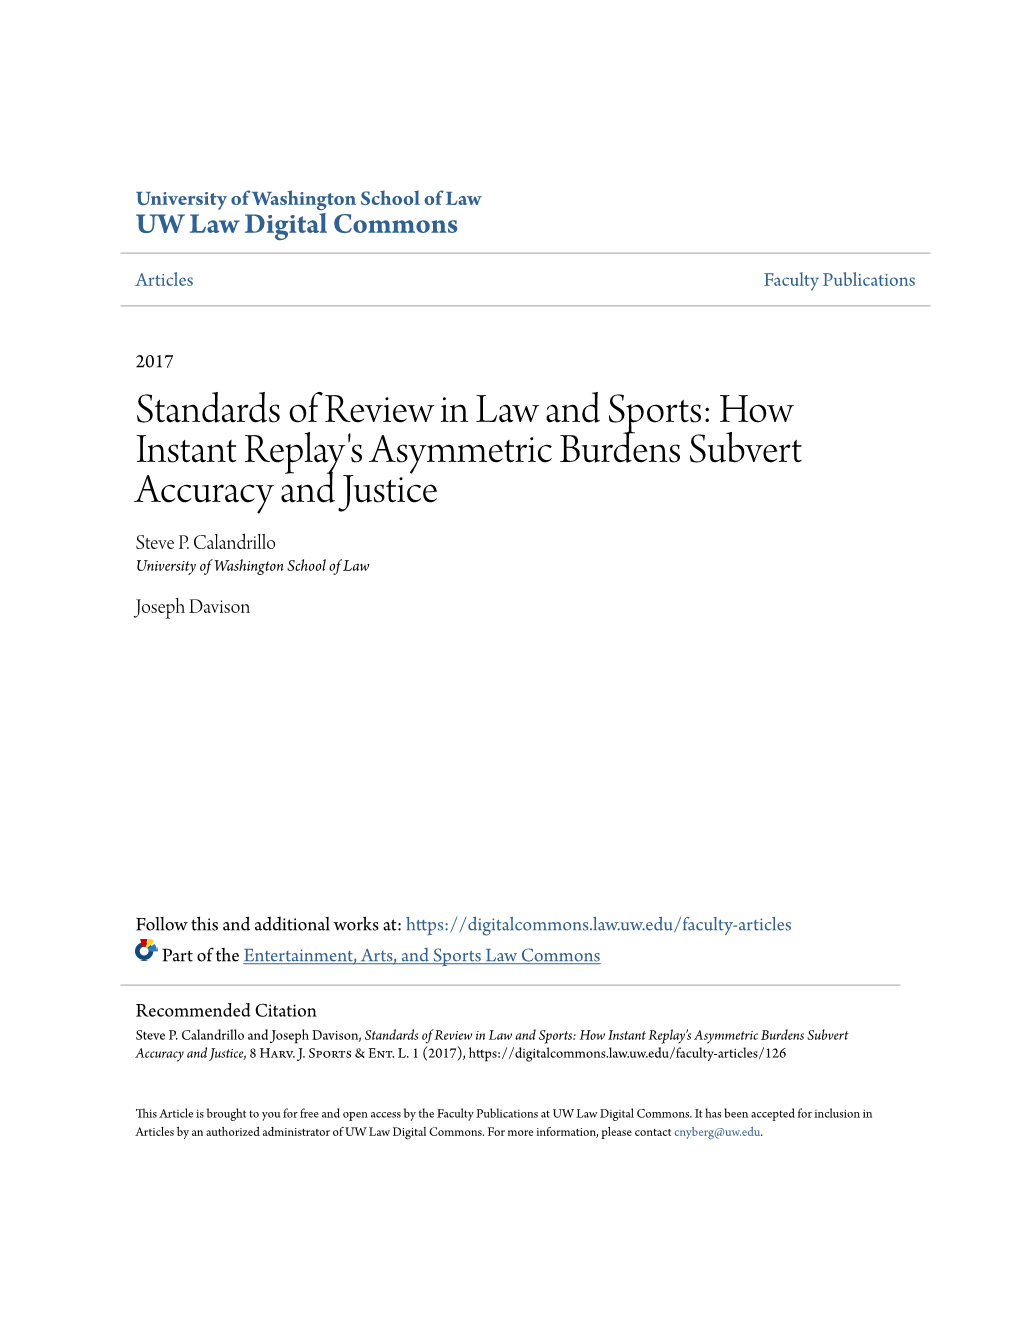 Standards of Review in Law and Sports: How Instant Replay's Asymmetric Burdens Subvert Accuracy and Justice Steve P